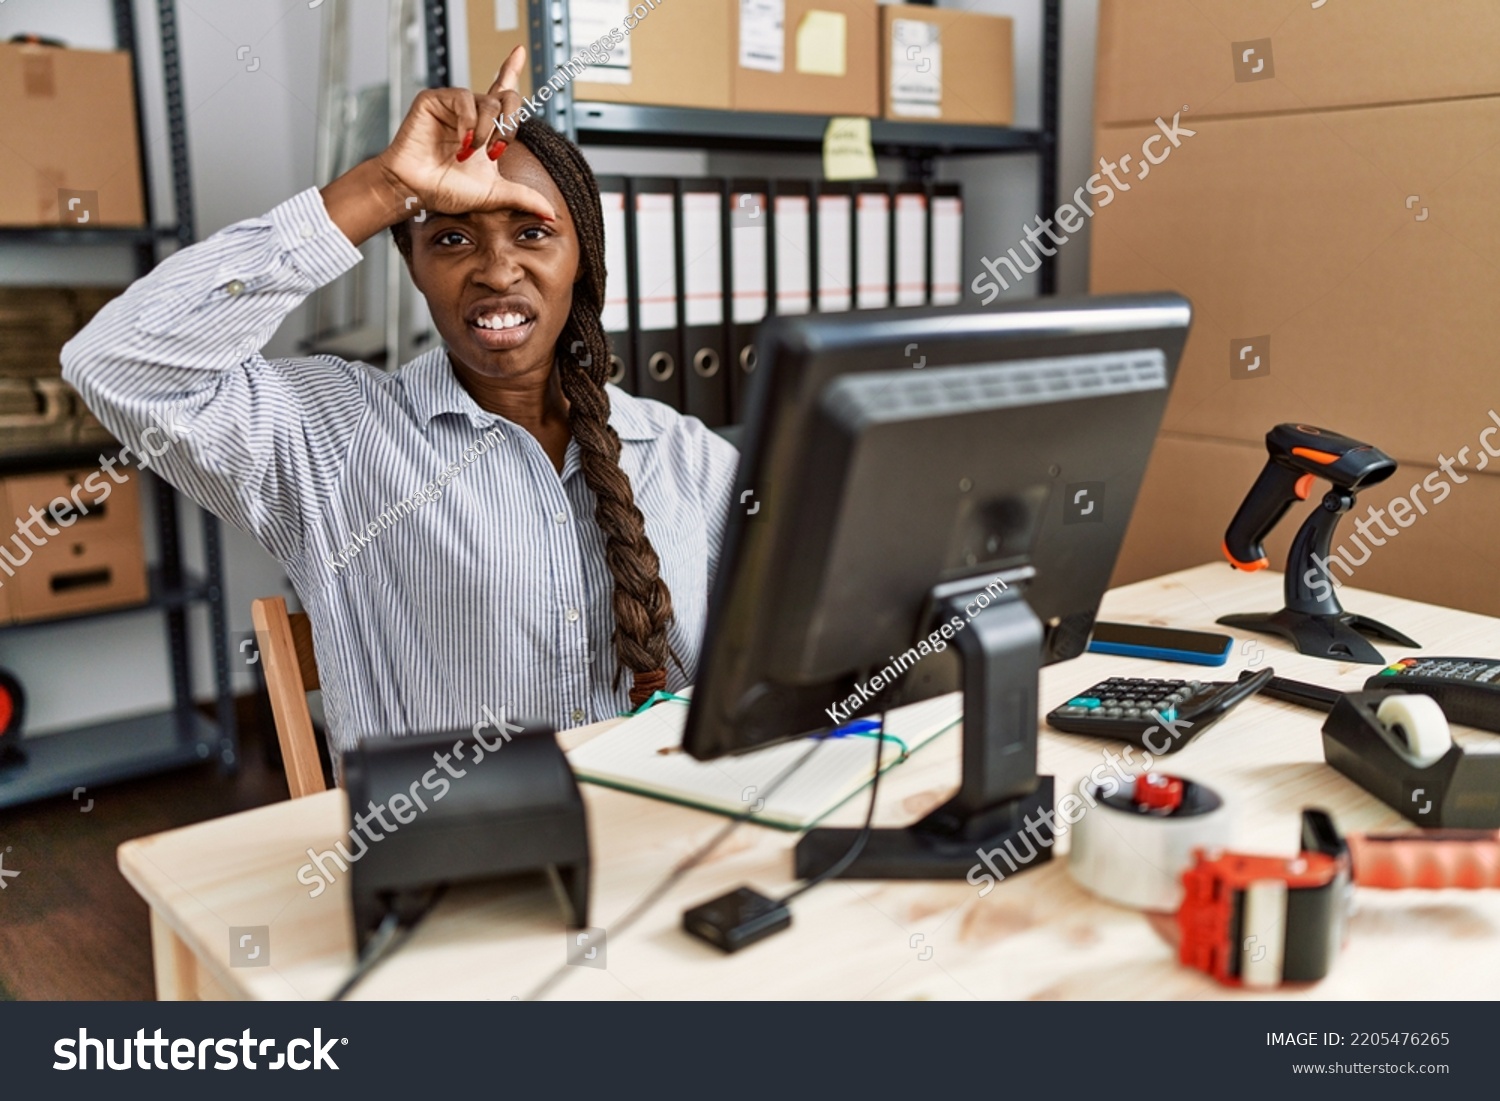 African woman working at small business ecommerce making fun of people with fingers on forehead doing loser gesture mocking and insulting.  #2205476265